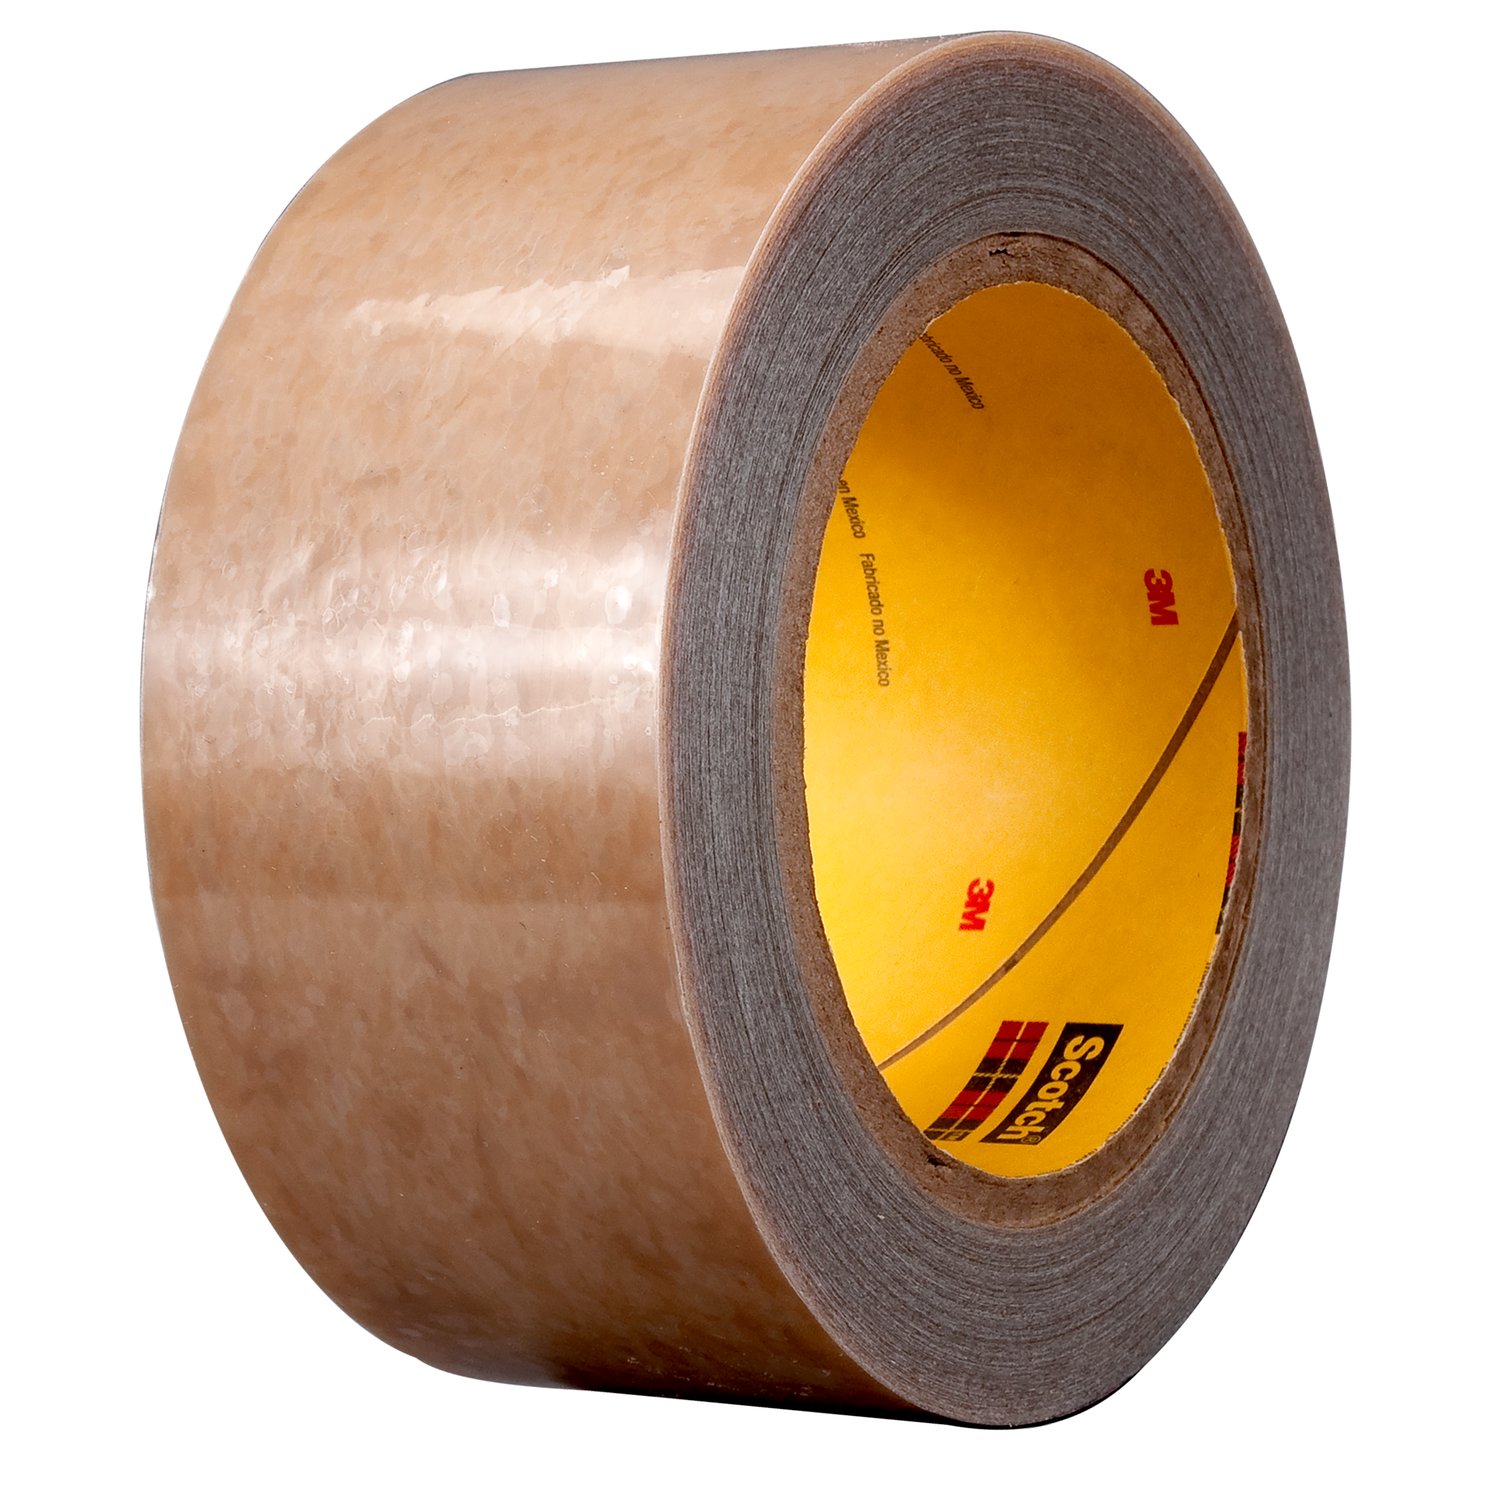 7000048448 - 3M Polyester Protective Tape 336, Transparent, 12 in x 144 yd, 1.5 mil,
1 roll per case